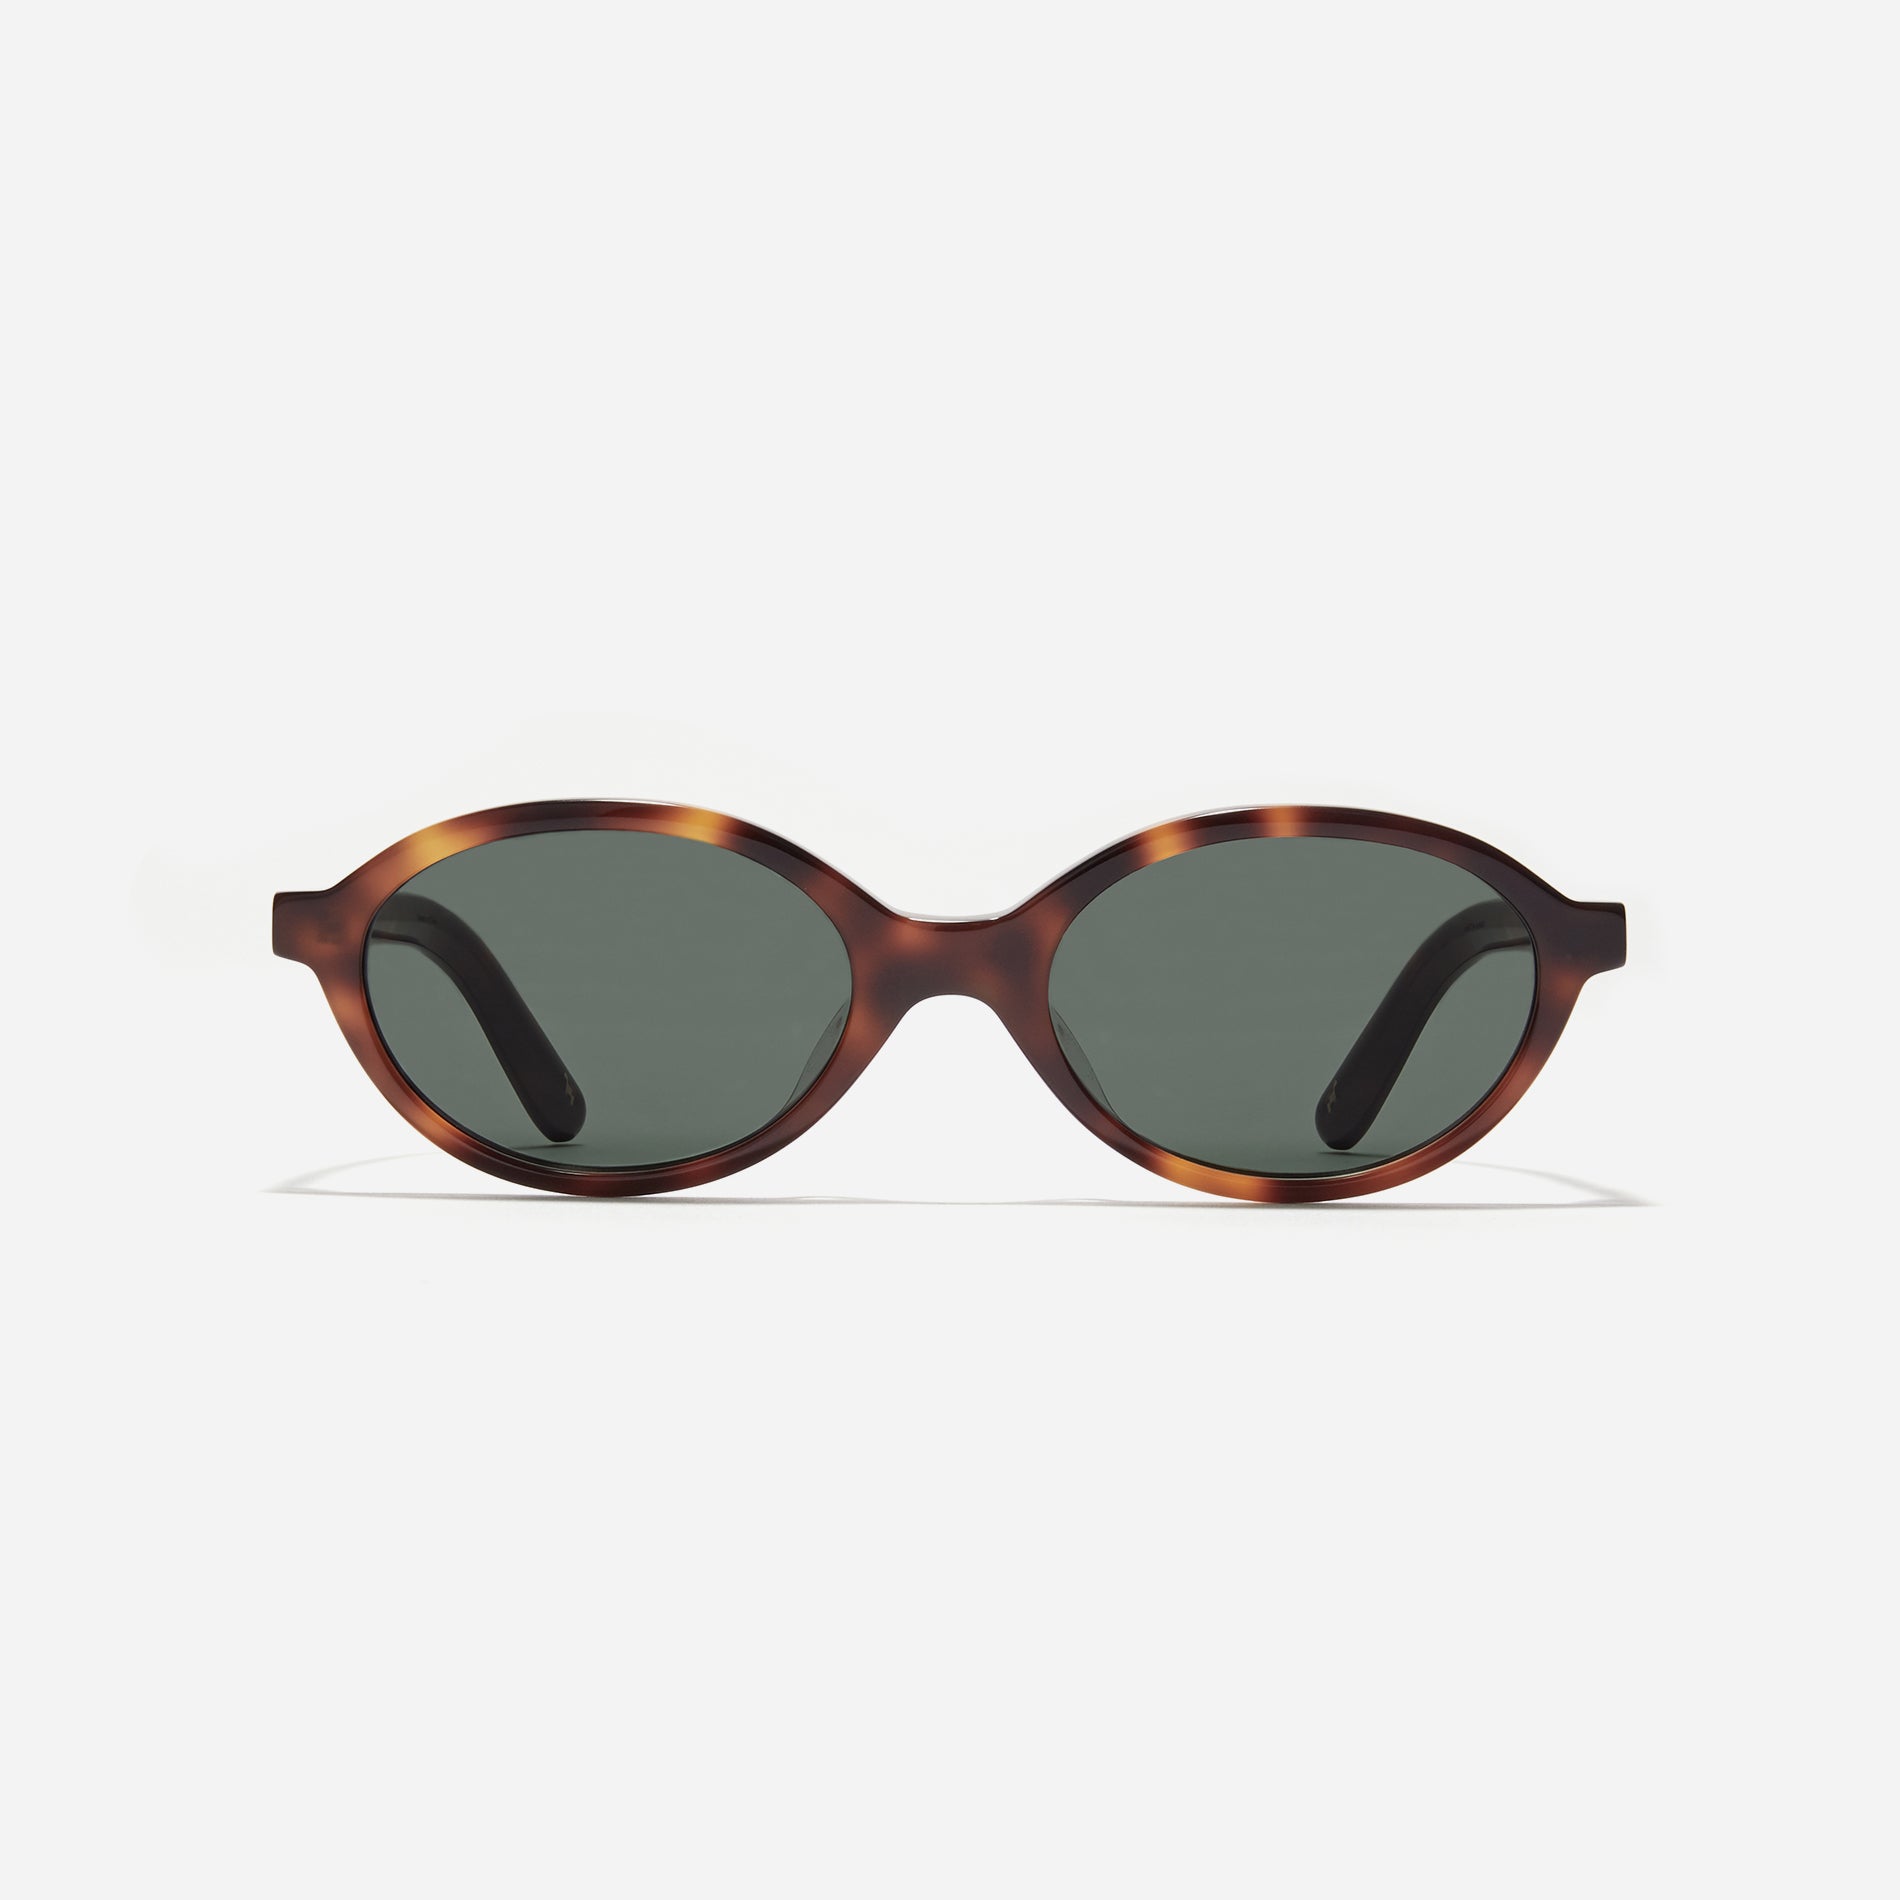 Acetate horn-rimmed glasses inspired by CARIN's best-selling 'AINO' frames. With their unique oval shape and narrow rims, they blend retro vibes with a modern twist. Discover the AINO sunglasses for a fresh take on a classic design.